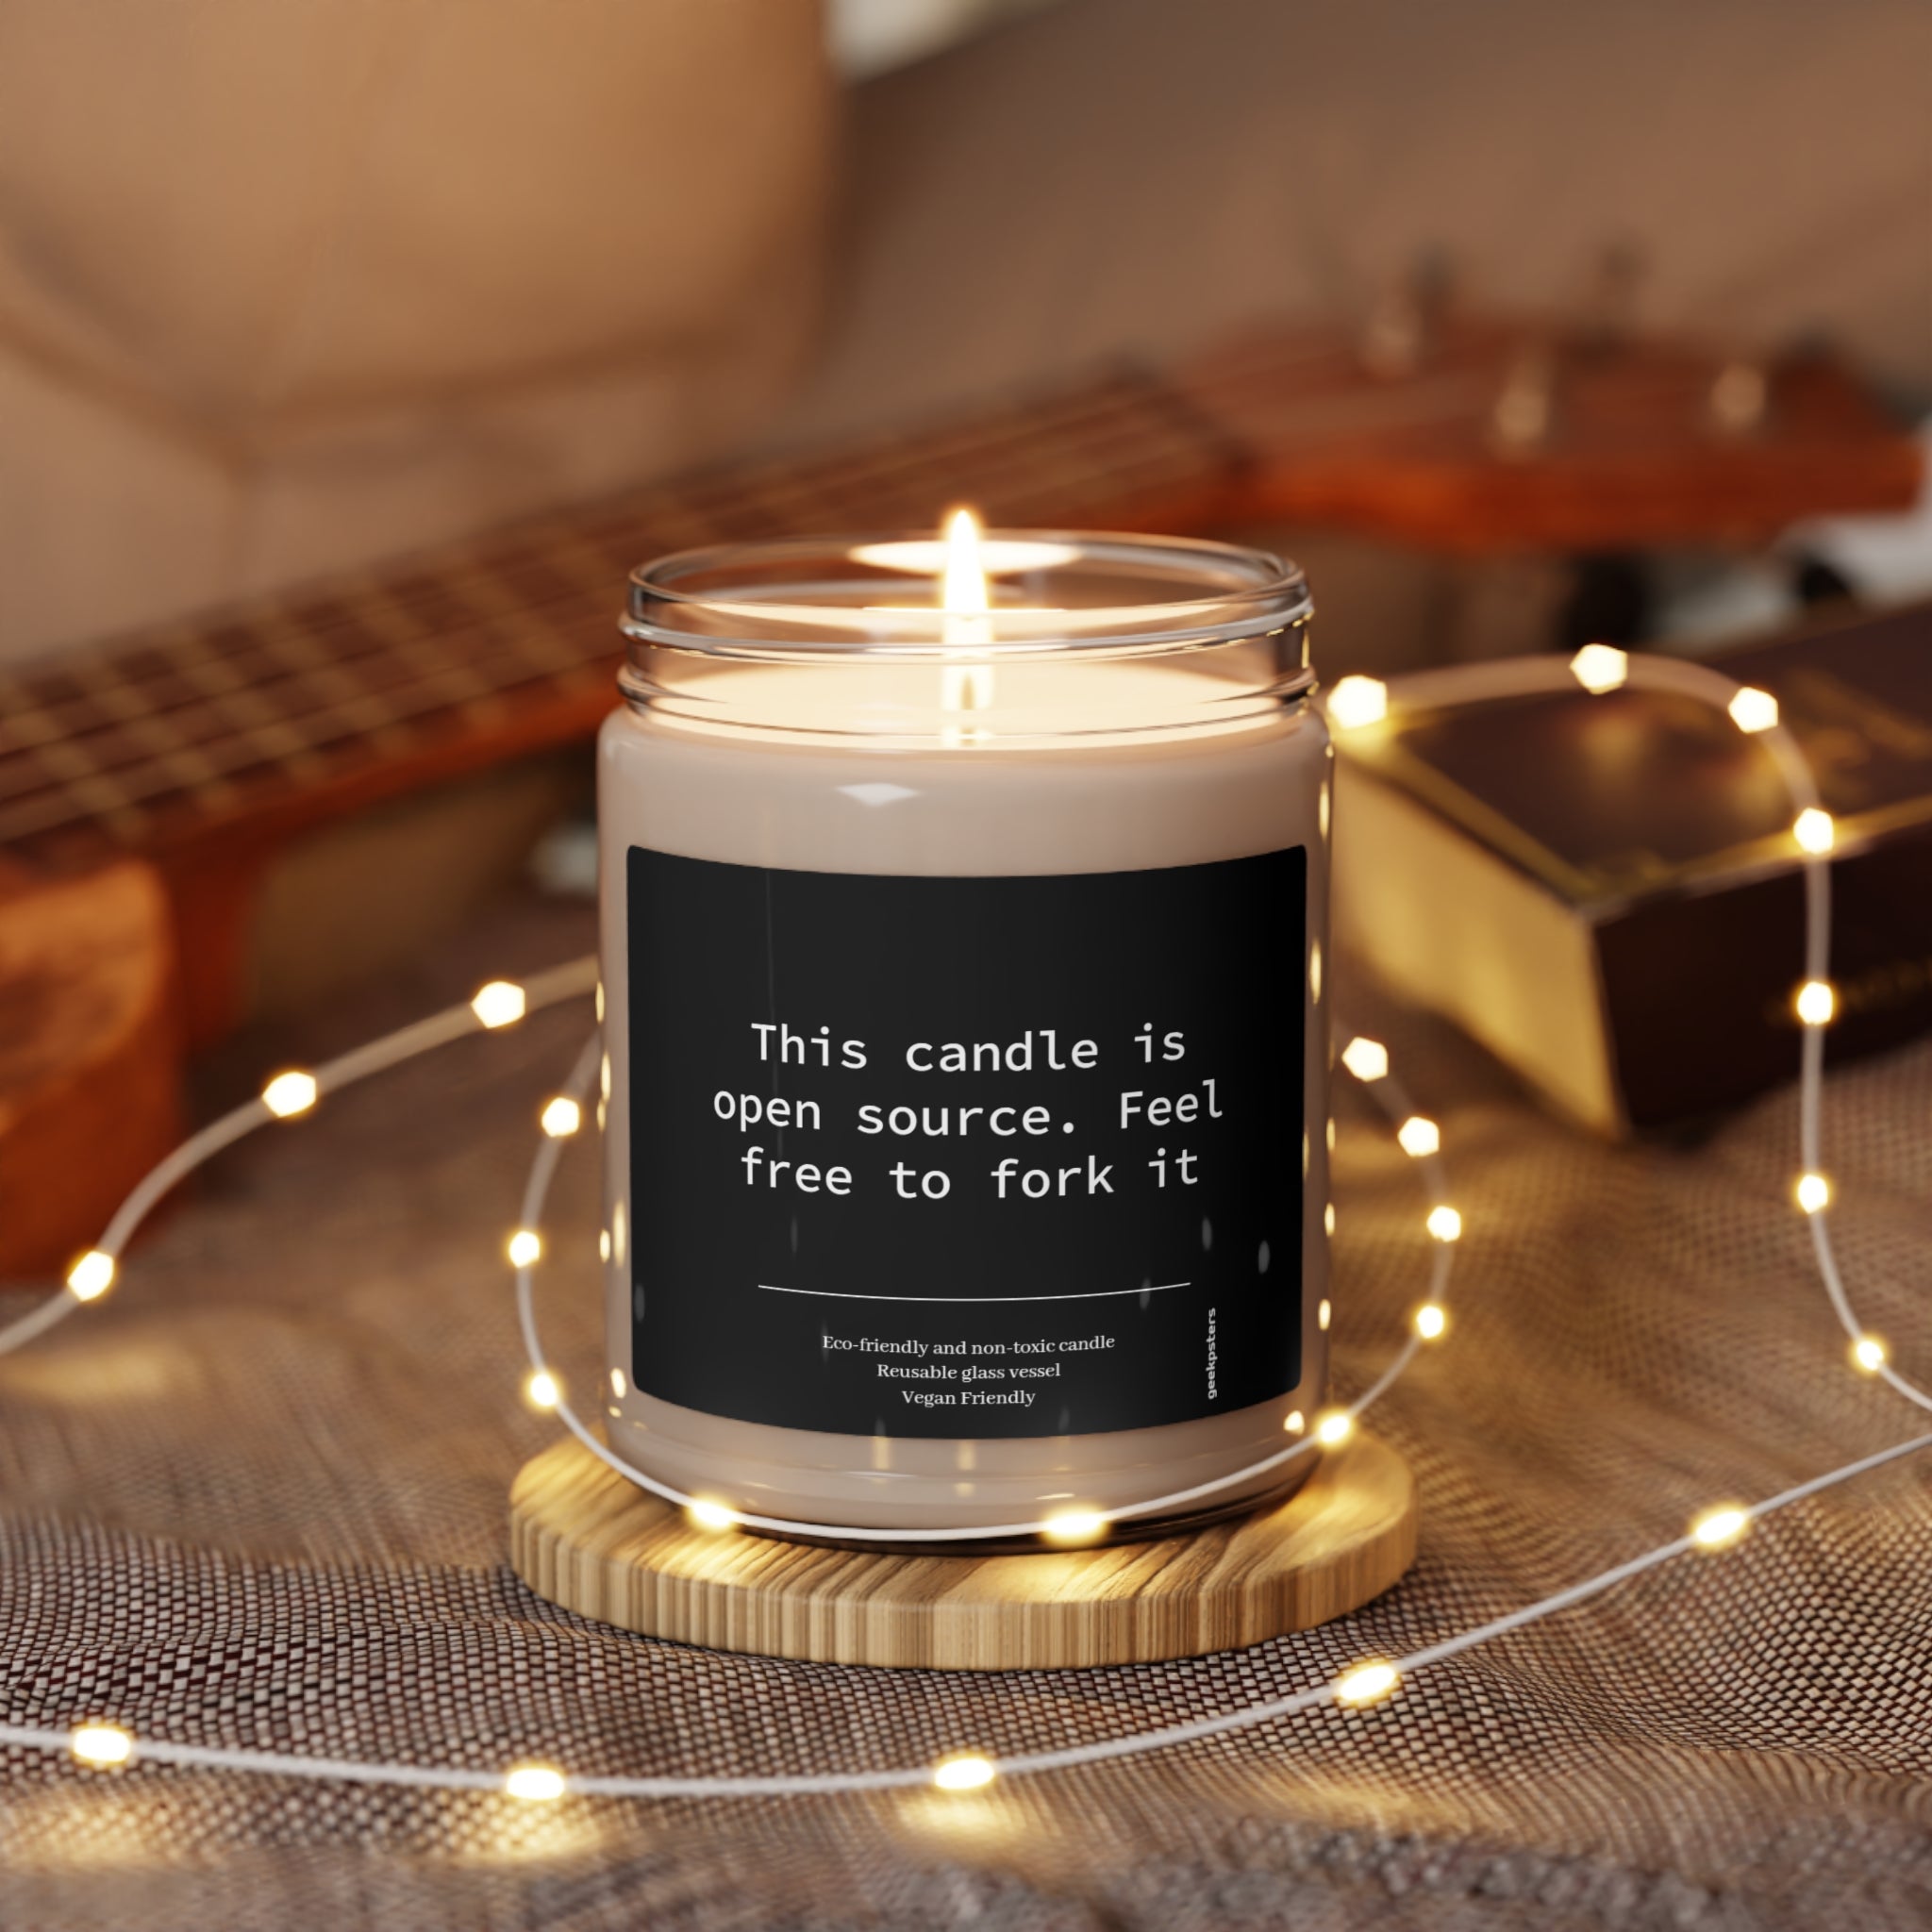 This This Candle is Open Source - Feel Free to Fork It - Scented Soy Candle, 9oz, set against a cozy background with fairy lights.